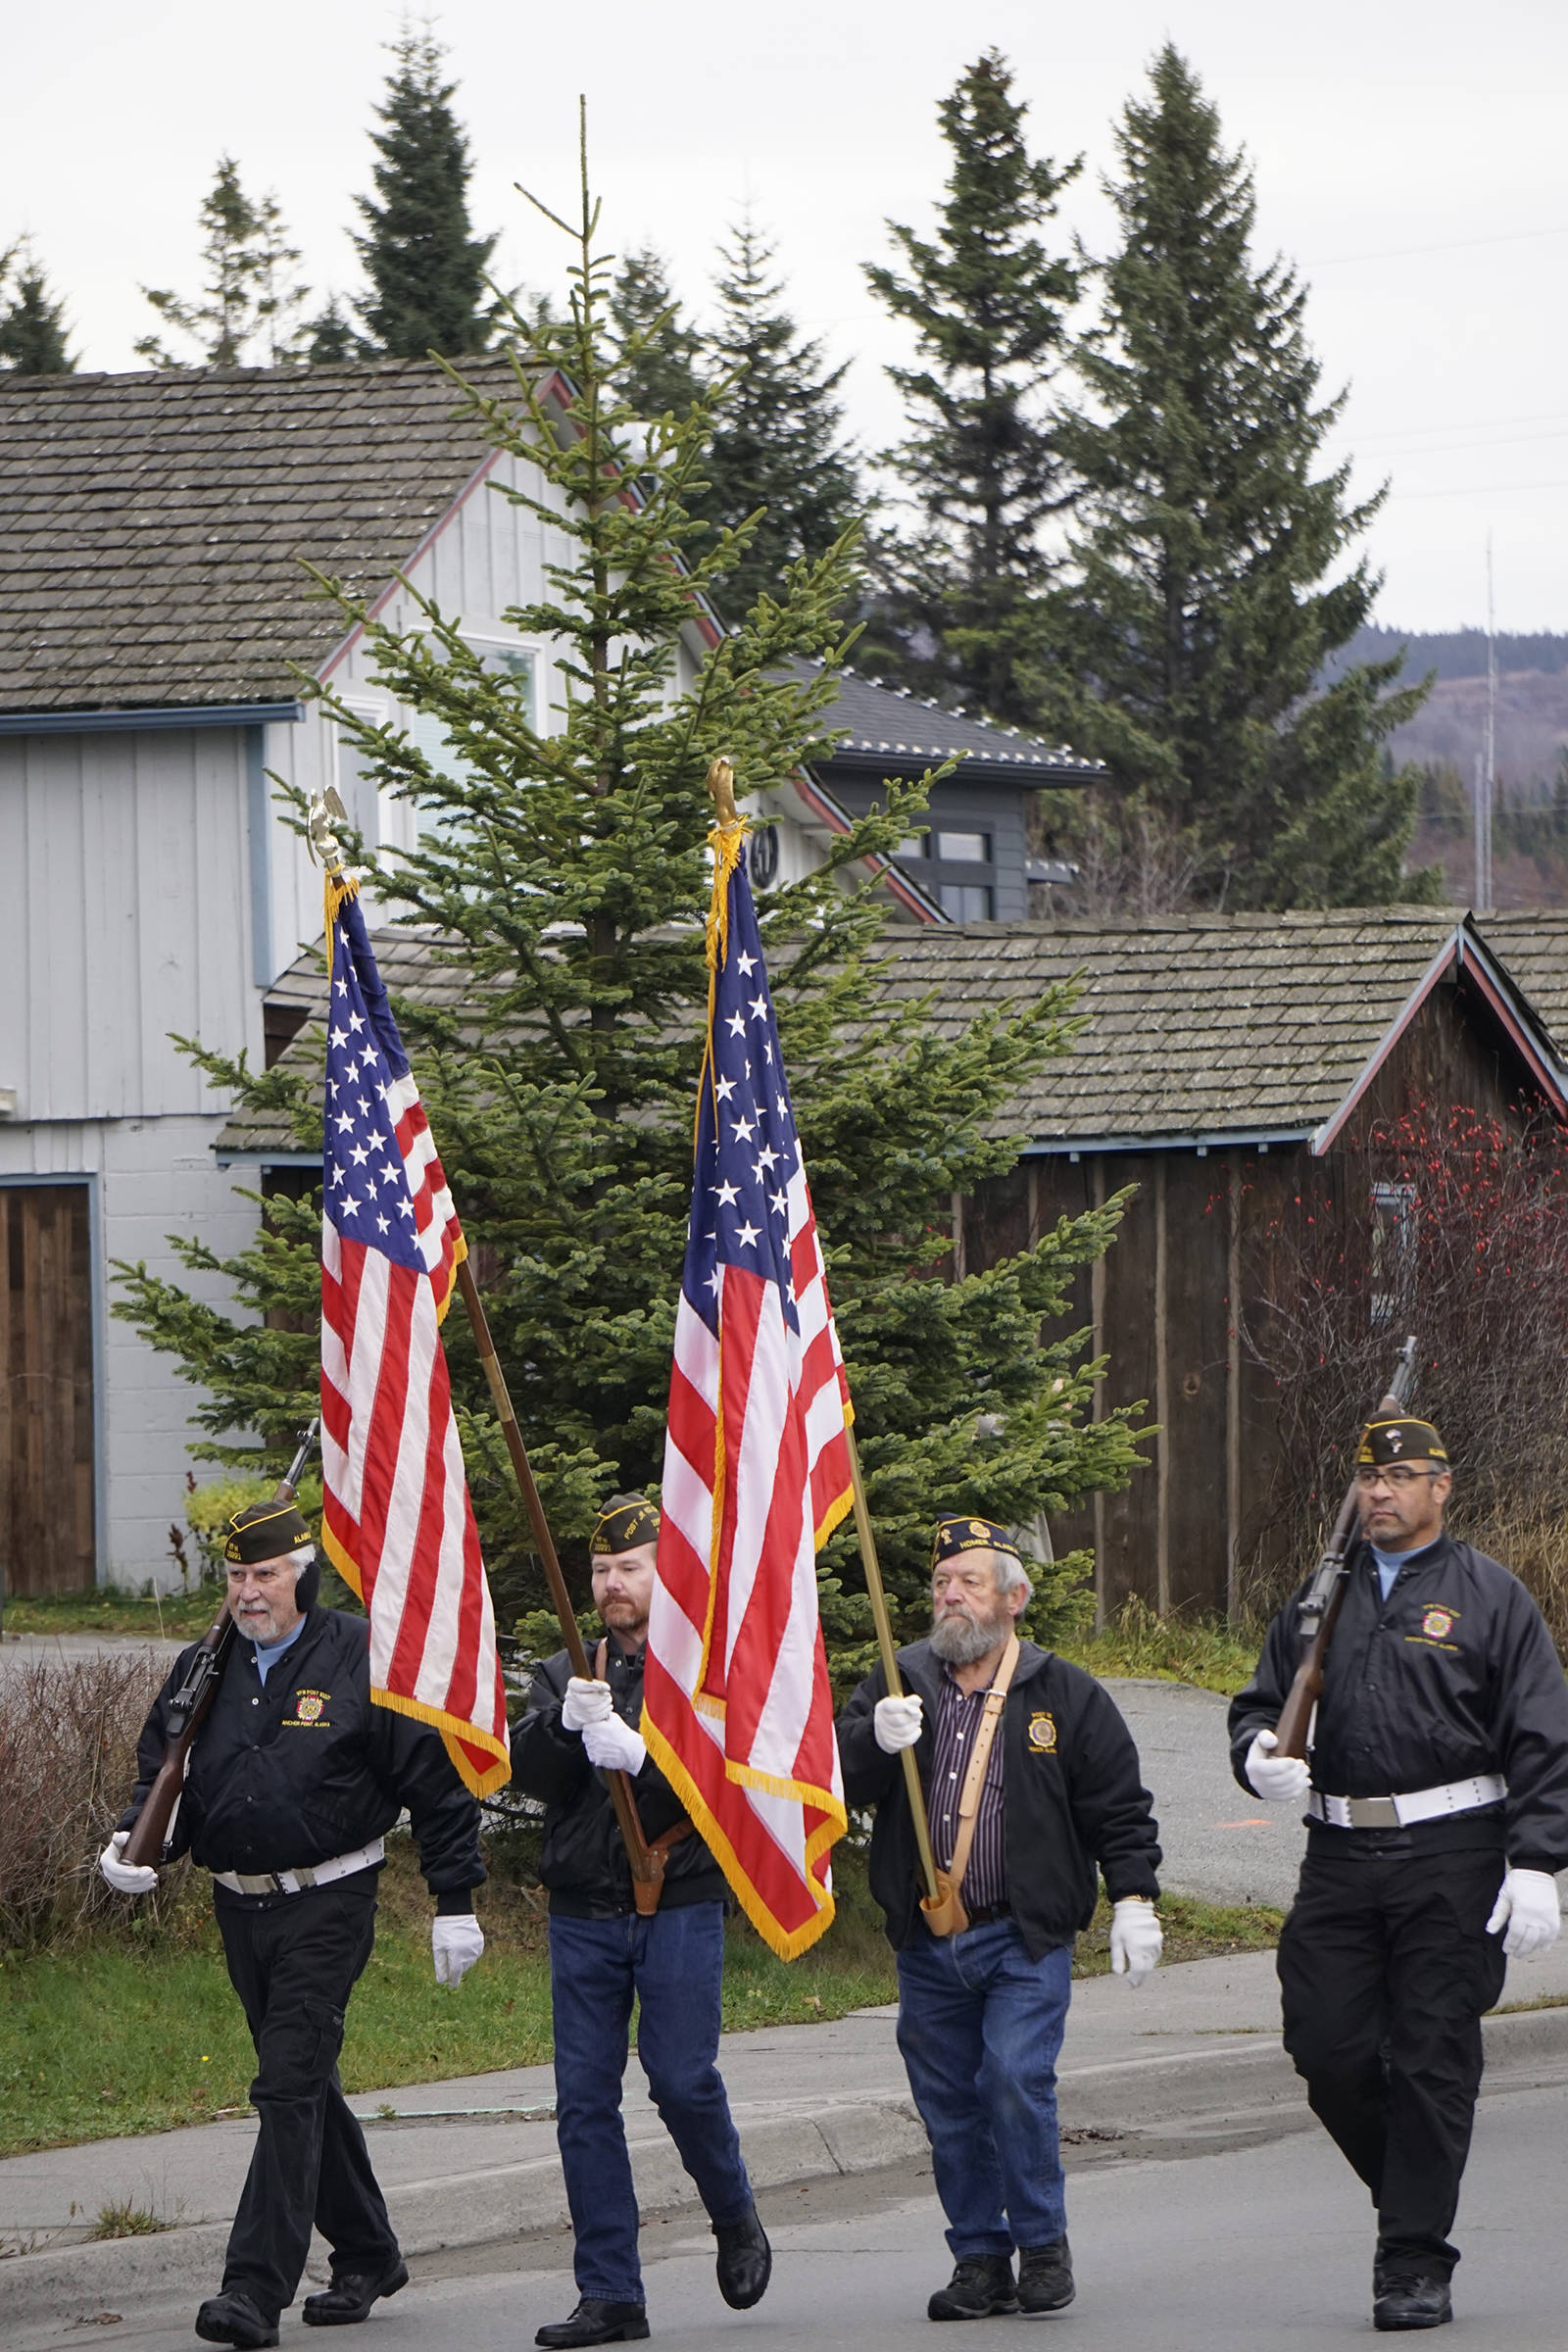 Members of the Veterans of Foreign Wars, Anchor Point Post, march on Pioneer Avenue in Veterans Day ceremonies on Nov. 11, 2019,in Homer, Alaska. (Photo by Michael Armstrong / Homer News)